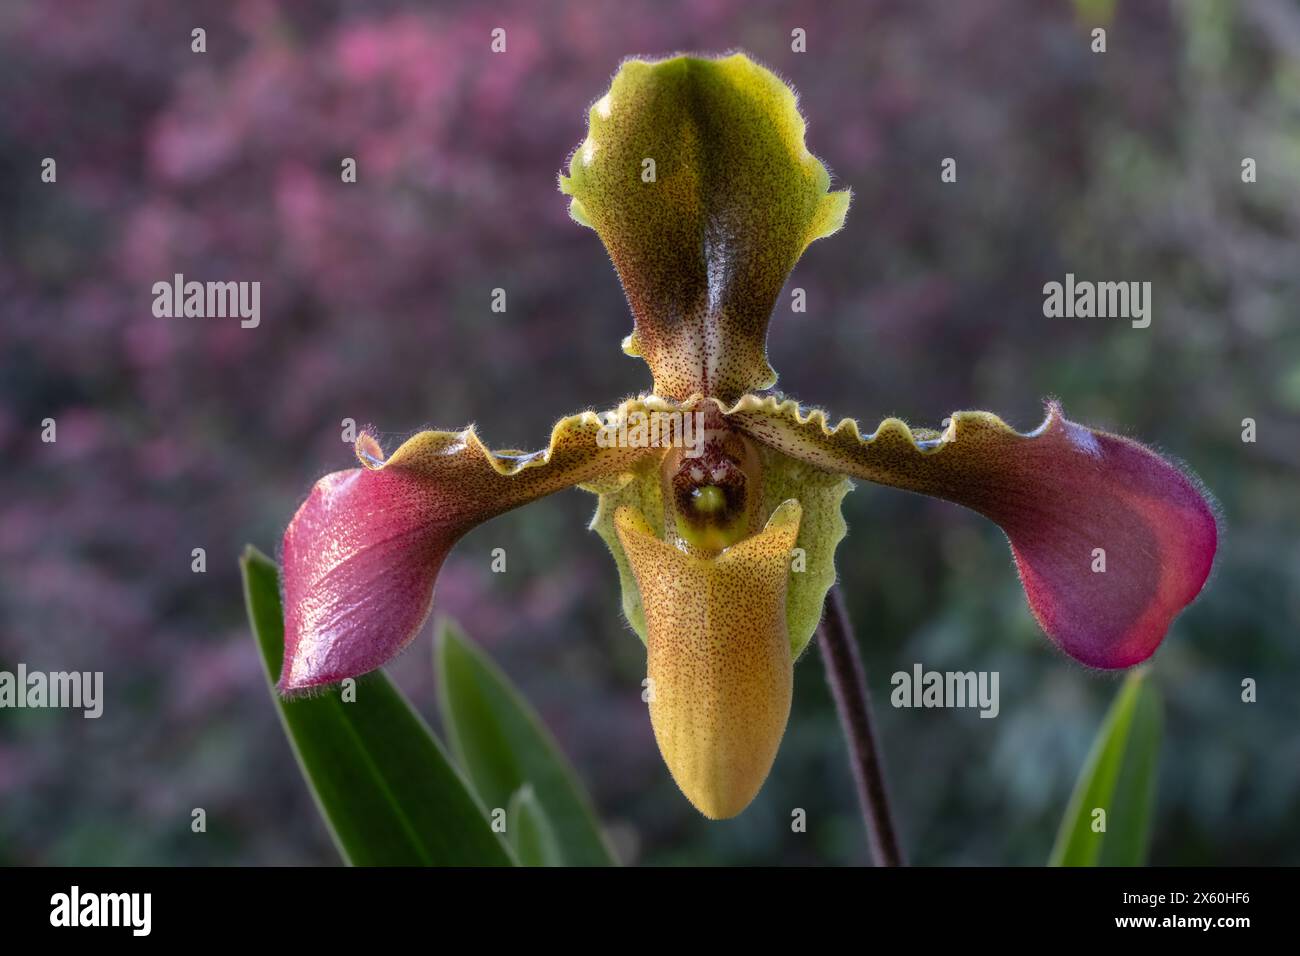 Closeup view of flower of lady slipper orchid species paphiopedilum hirsutissimum var. esquirolei isolated outdoors on colorful natural background Stock Photo